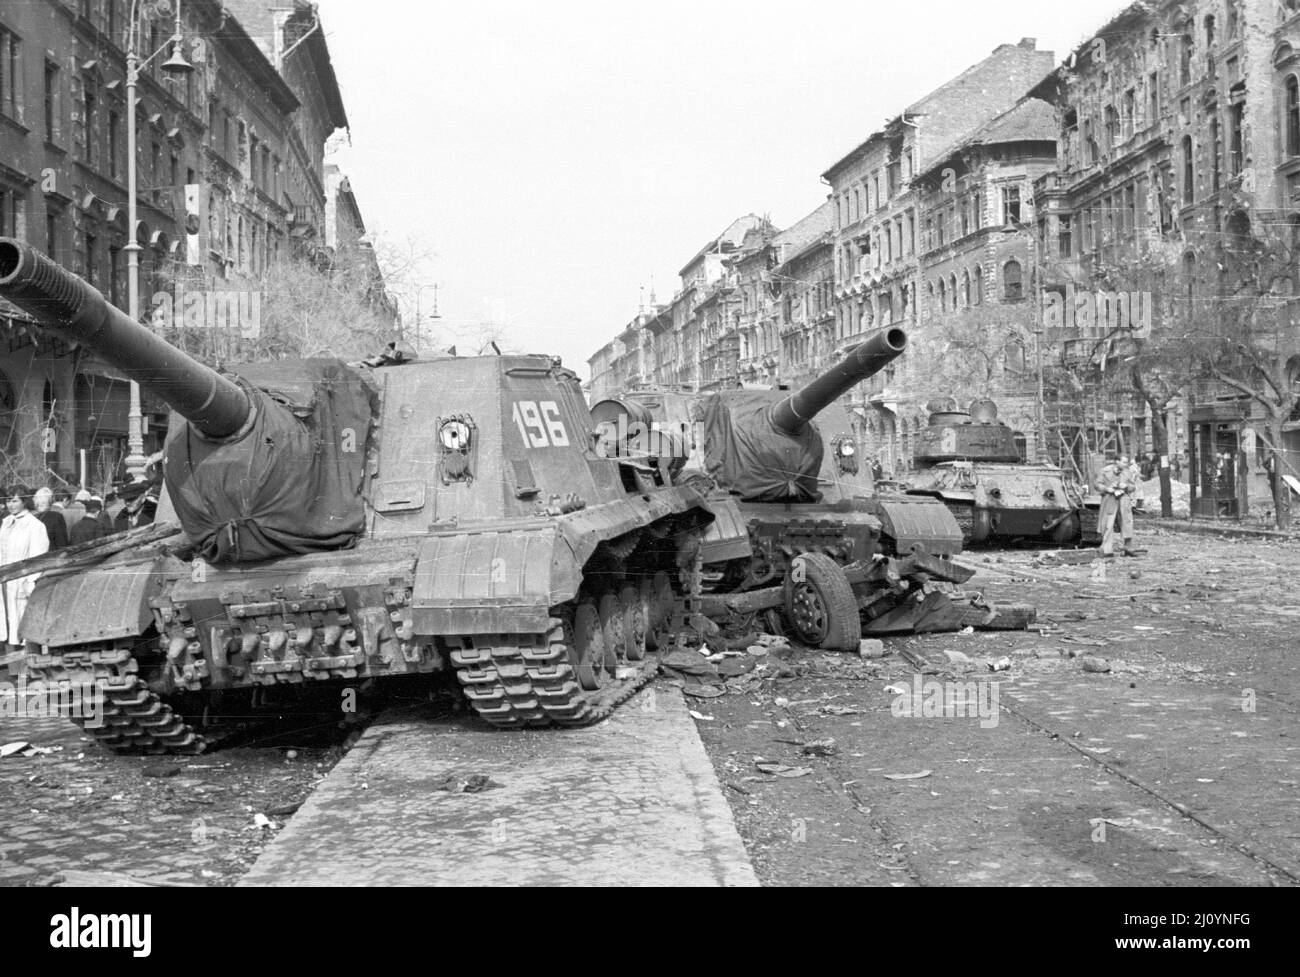 Two disabled Soviet ISU-152 assault guns in Budapest's 8th District with an abandoned T-34/85 tank in the background. during the 1956 Hungarian Revolution Stock Photo